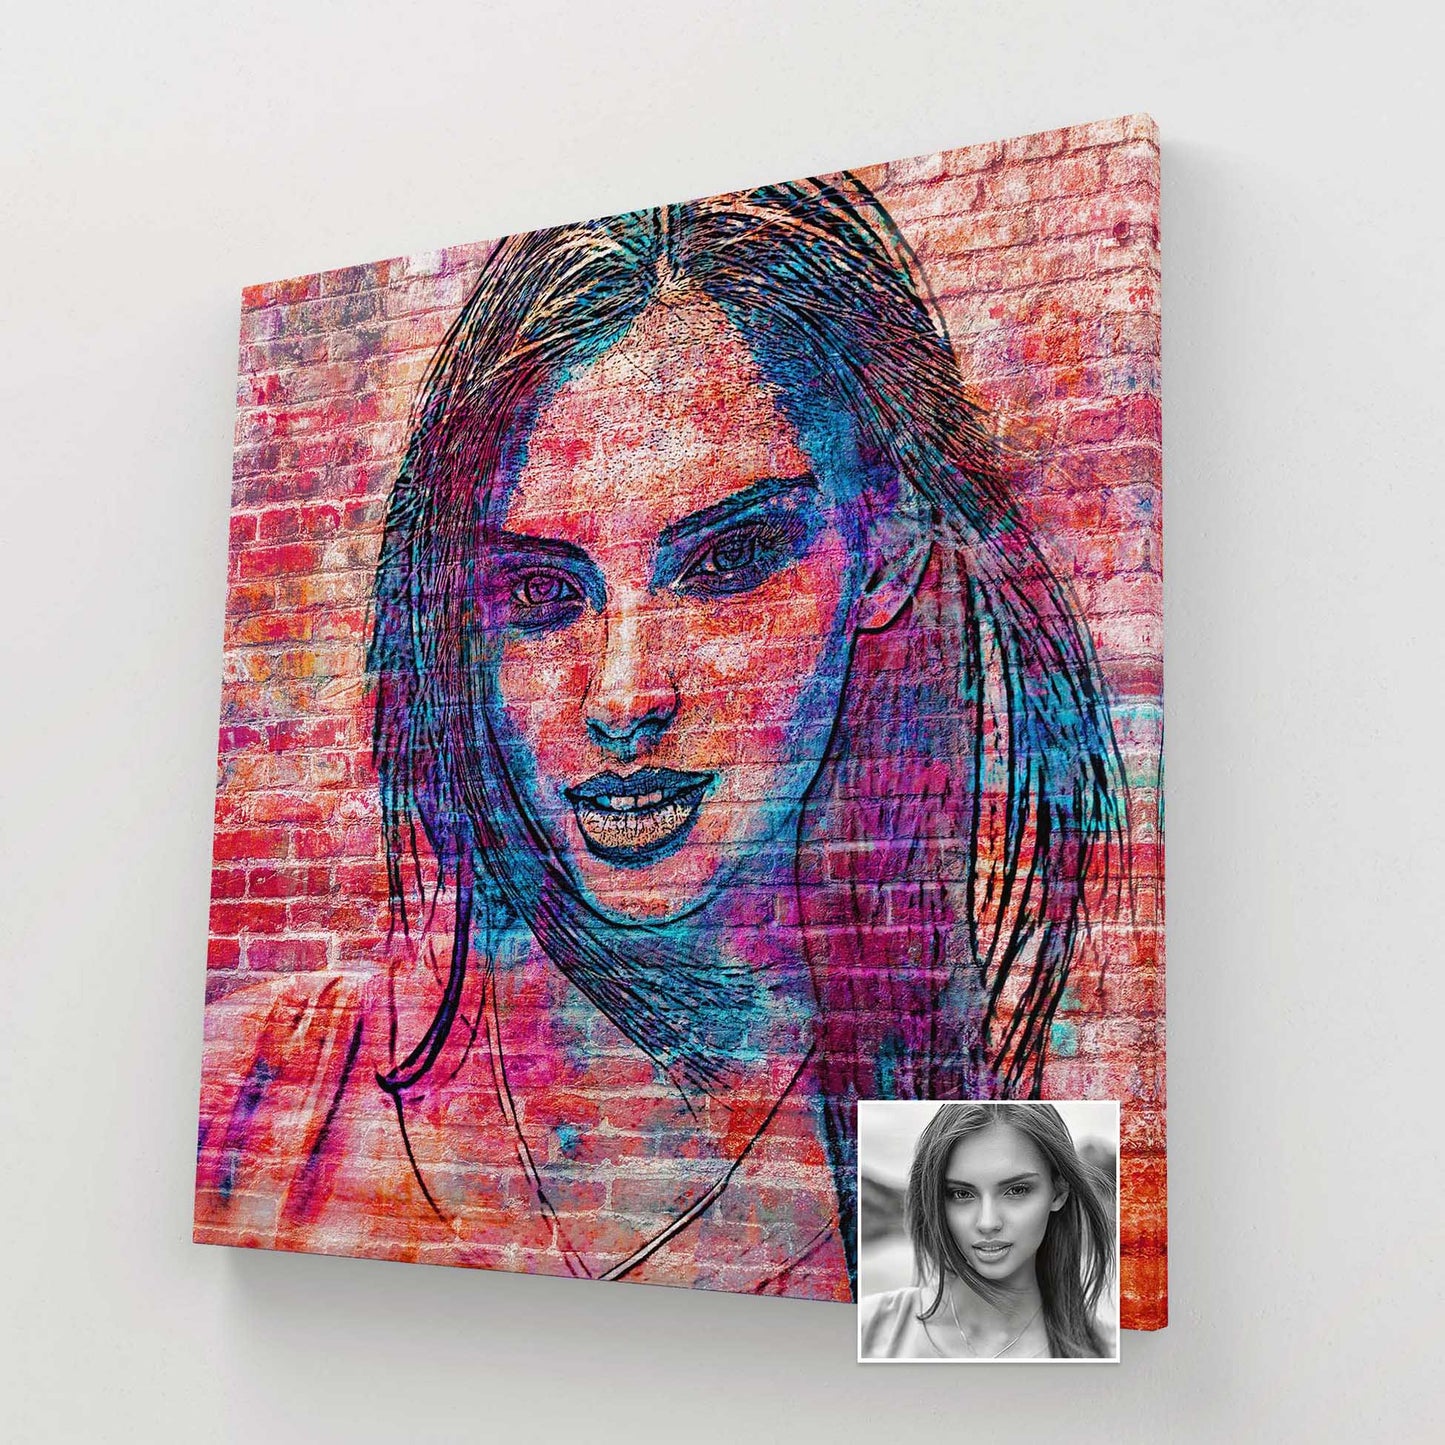 Urban Vibes - Personalised Brick Graffiti Street Art Canvas - Bring the city streets into your home with this unique wall art. The graffiti-inspired design on a brick canvas creates an original and artistic focal point